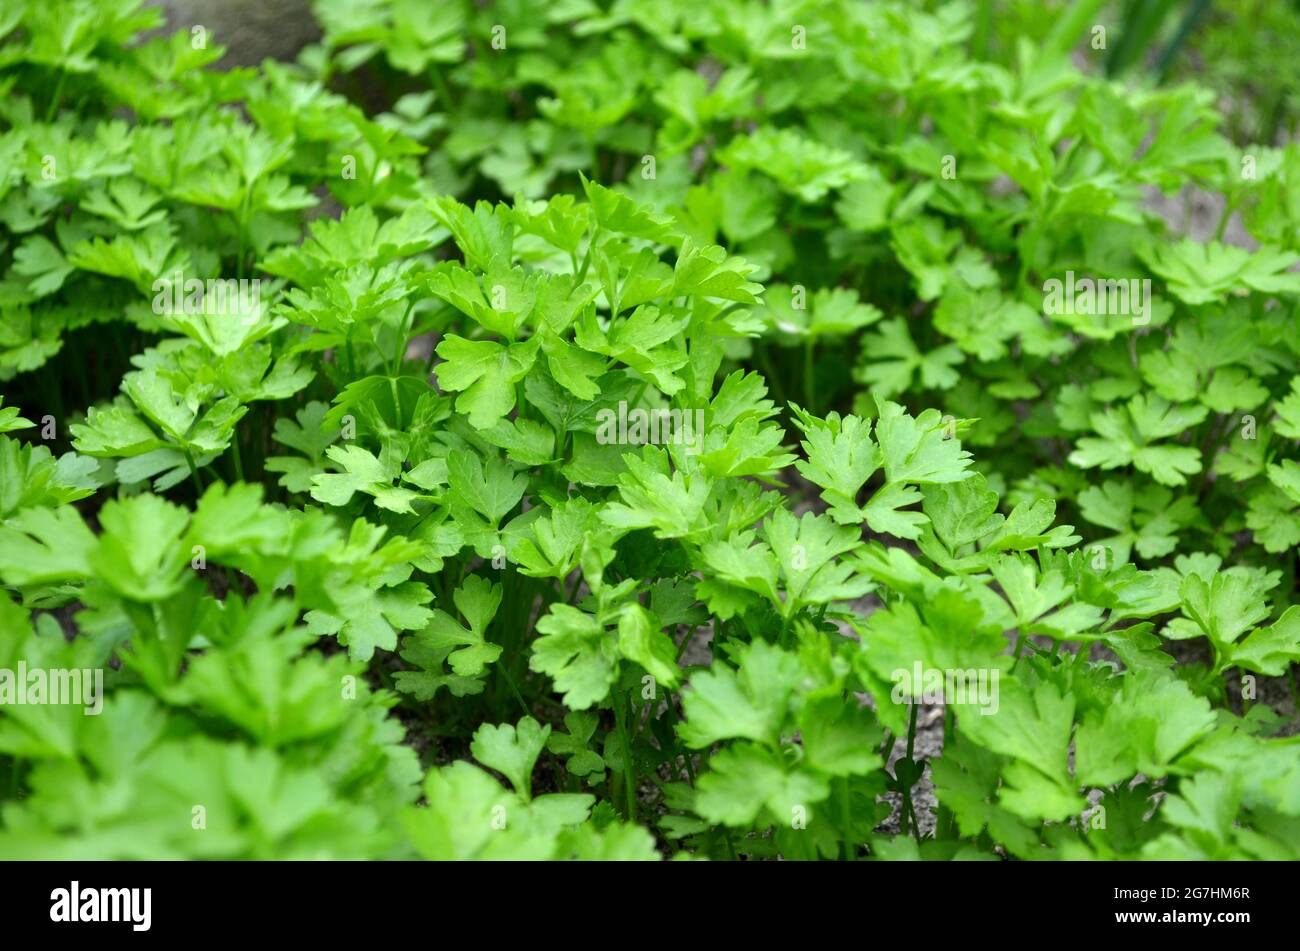 Close-up greens leaves of parsley growing in the garden, selective focus. Concept of growing your own organic food. Stock Photo